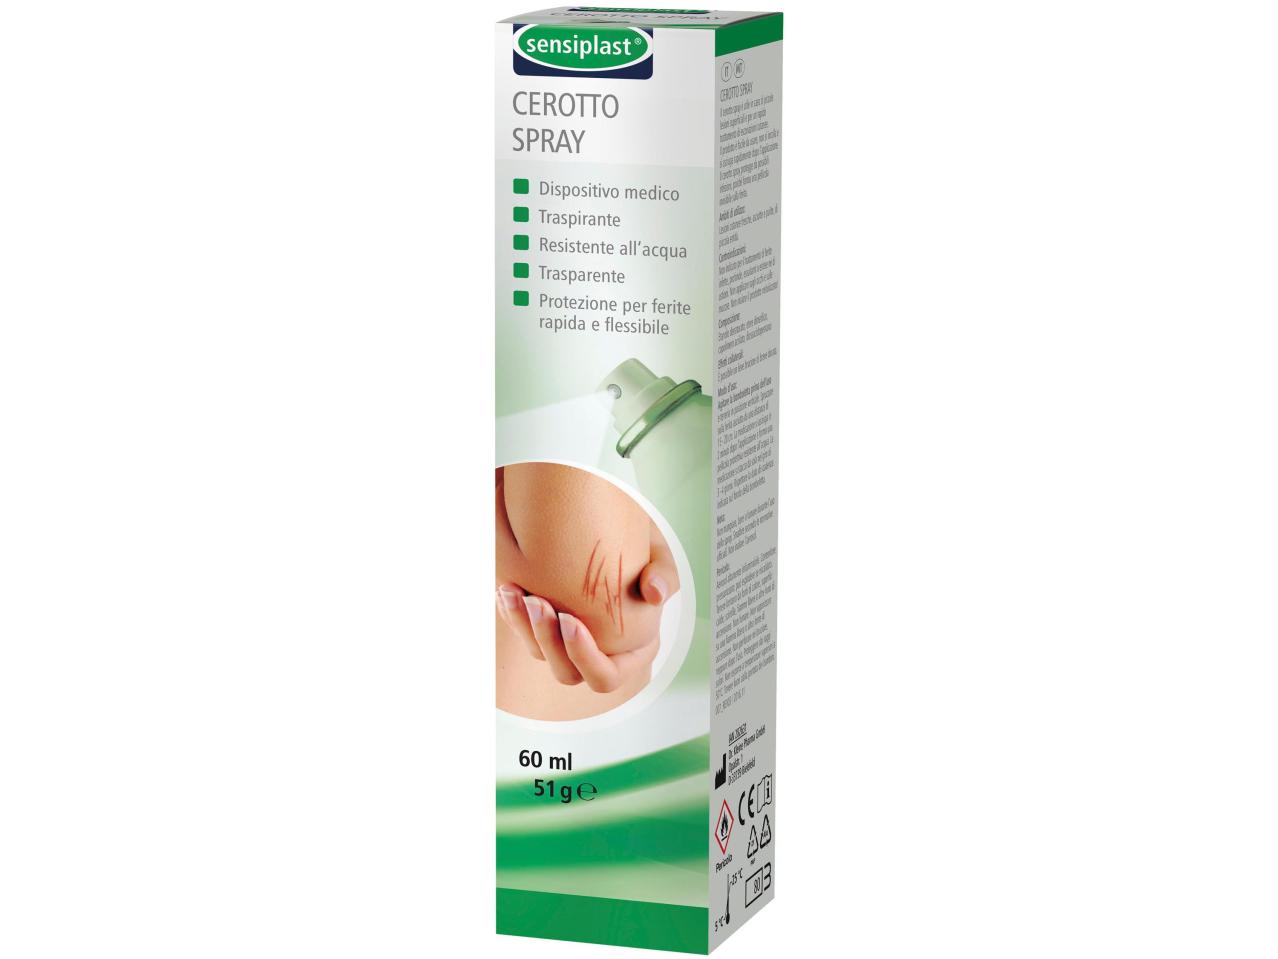 Cream for Cuts and Burns, Spray-On Plaster or Haemostatic Spray for Cuts